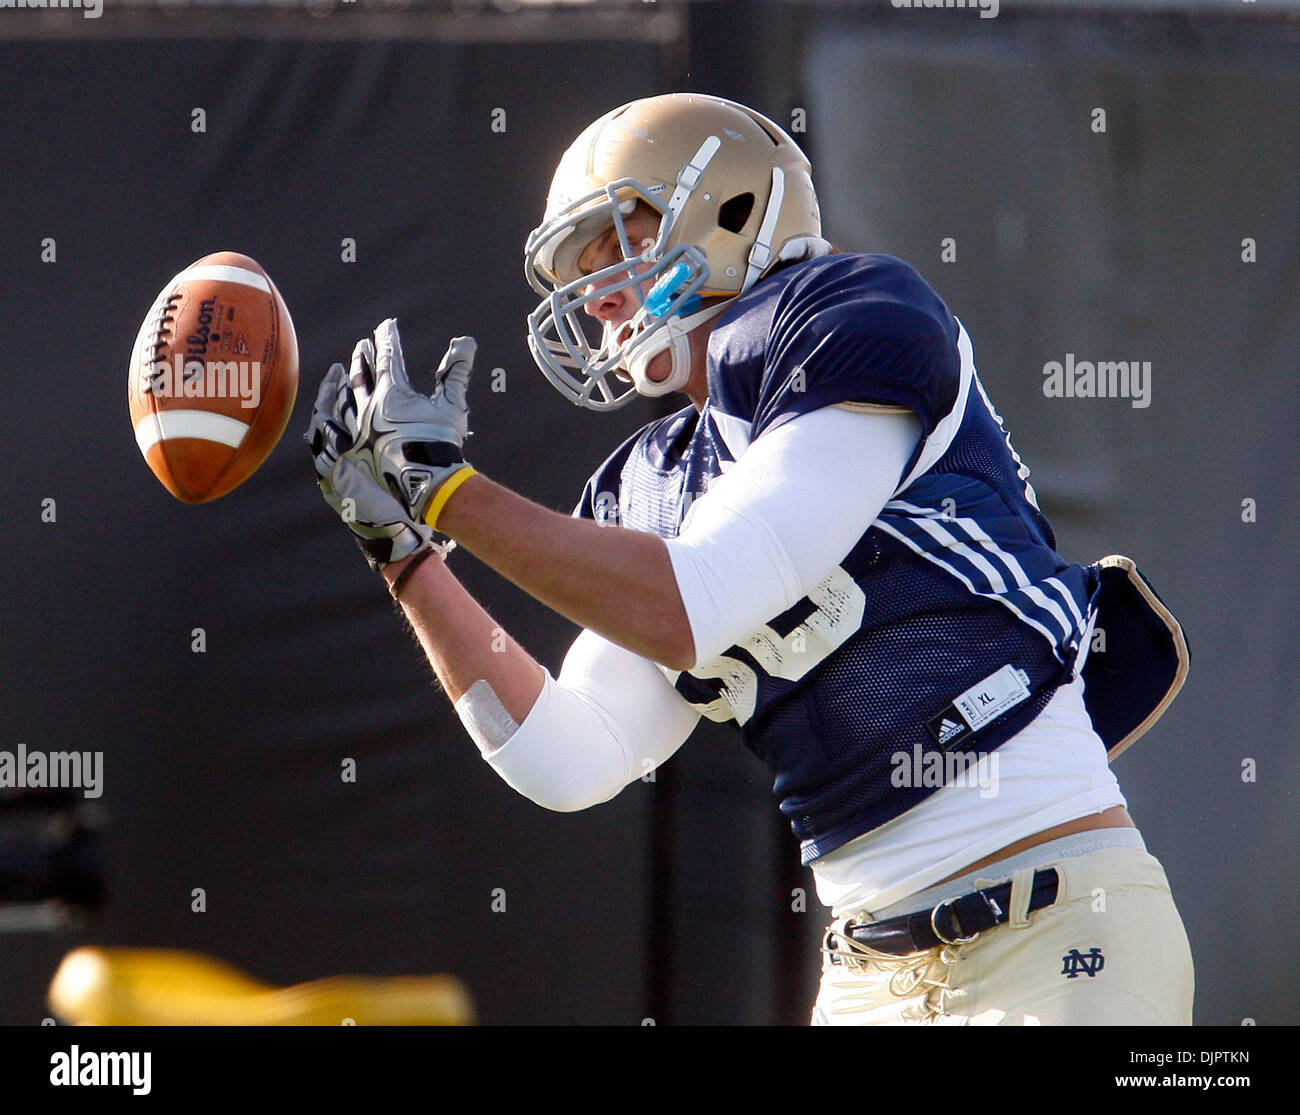 Apr 17, 2010 - South Bend, Indiana, U.S. - Notre Dame tight end JAKE GOLIC drops a pass during practice Saturday in South Bend, Indiana. (Credit Image: © Jim Rider/ZUMA Press) Stock Photo